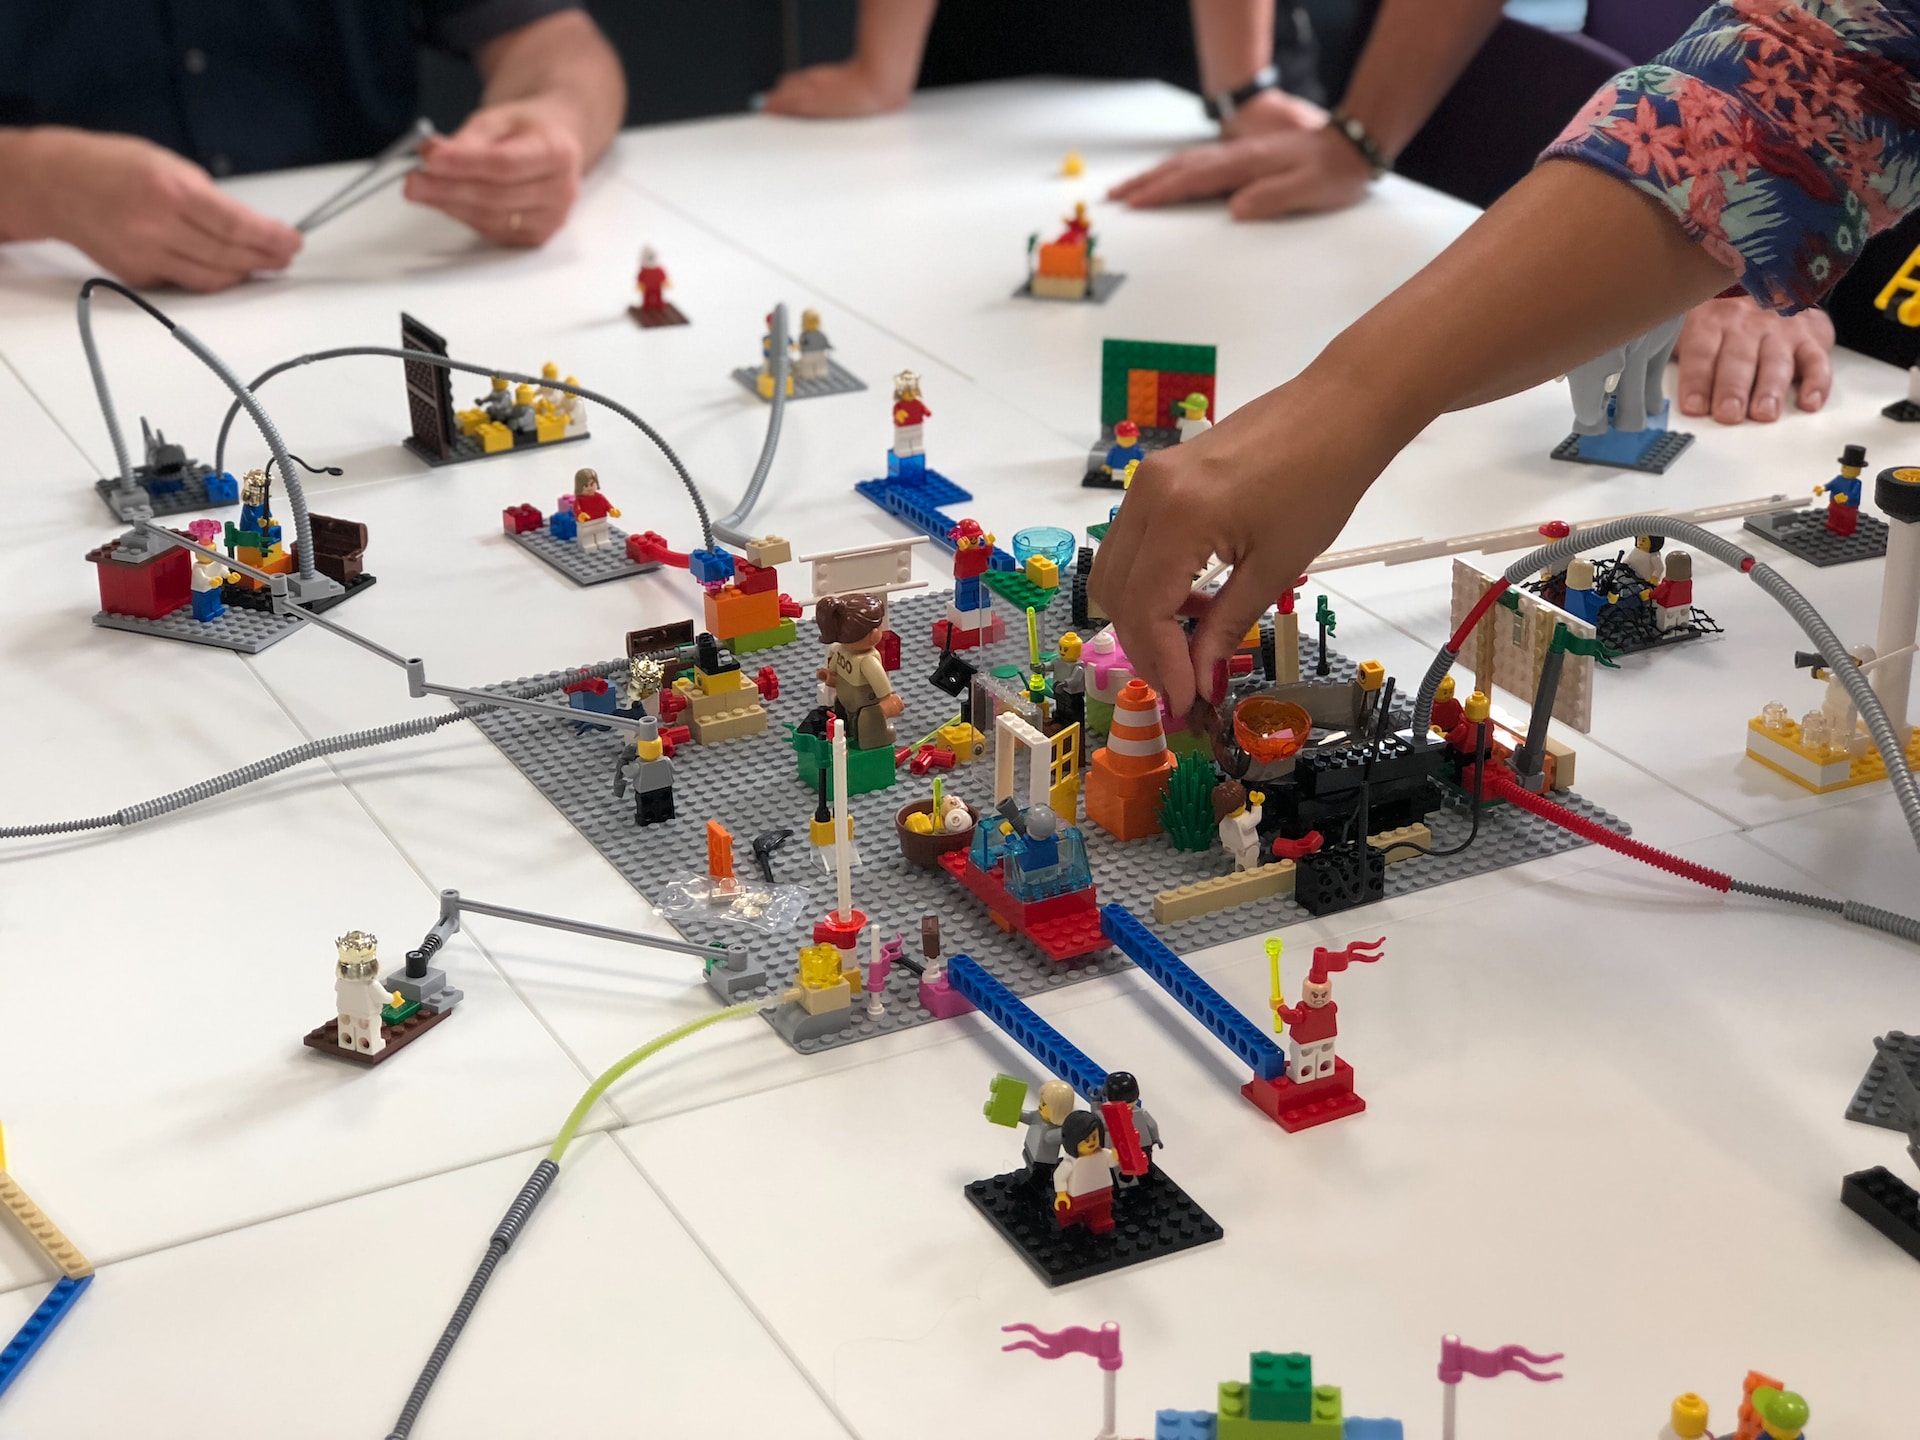 People playing with Lego on a flat surface